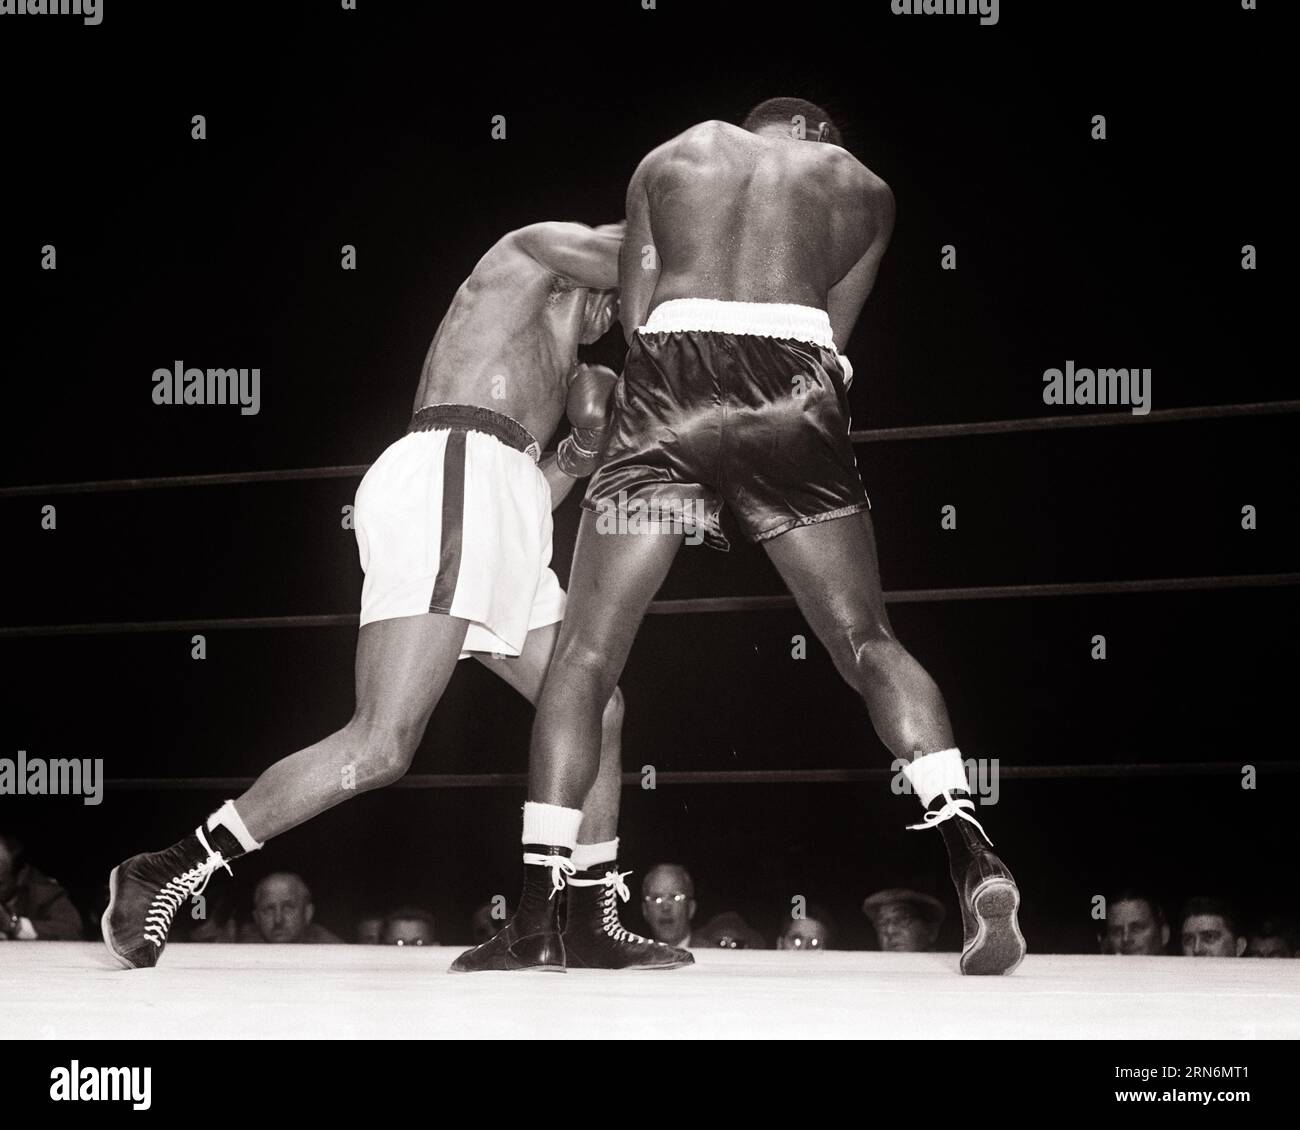 1950s BACK VIEW TWO AFRICAN AMERICAN BOXERS HEAVYWEIGHT BOUT ARCH RIVALS JERSEY JOE WALCOTT LIGHT TRUNKS VS EZZARD CHARLES DARK - p1397 HAR001 HARS OCCUPATIONS FROM BEHIND PUGILIST RIVALS JOE PUGILISM BACK VIEW BOUT CHARLES MID-ADULT MID-ADULT MAN TRUNKS BLACK AND WHITE HAR001 OLD FASHIONED AFRICAN AMERICANS Stock Photo